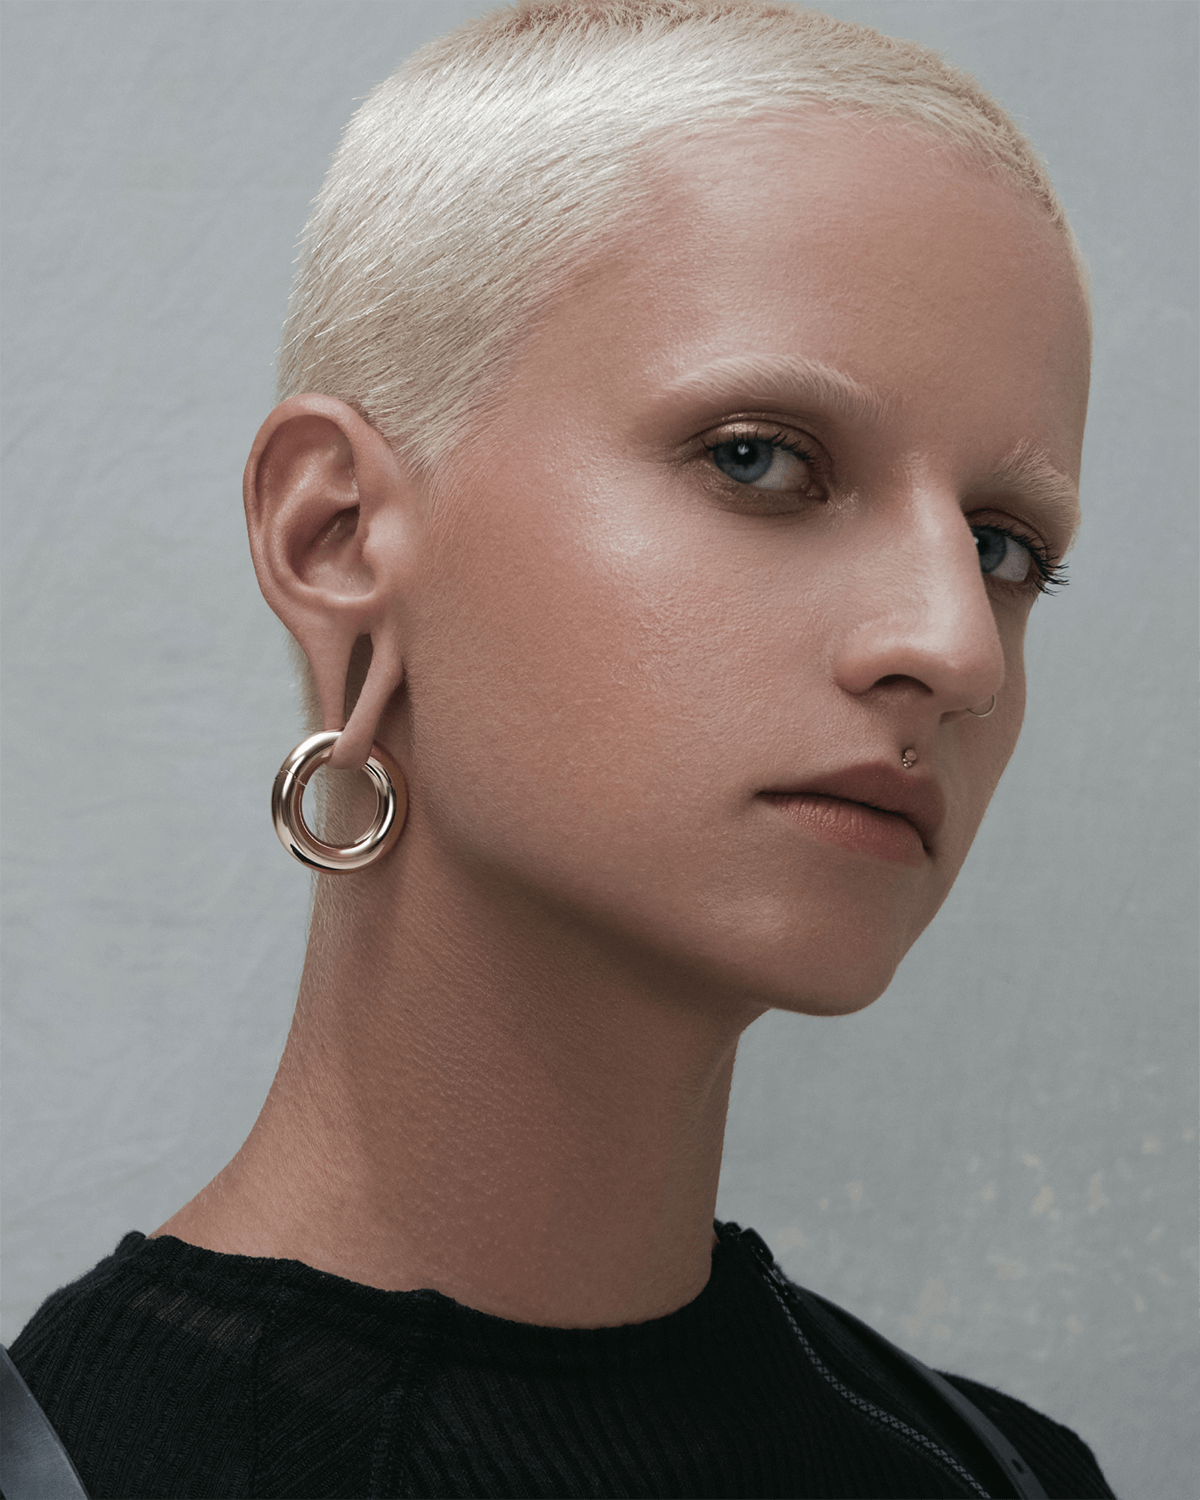 BLOOM HANGERS BY JENTONIC X ASK & EMBLA, Stretched Ear Jewelry